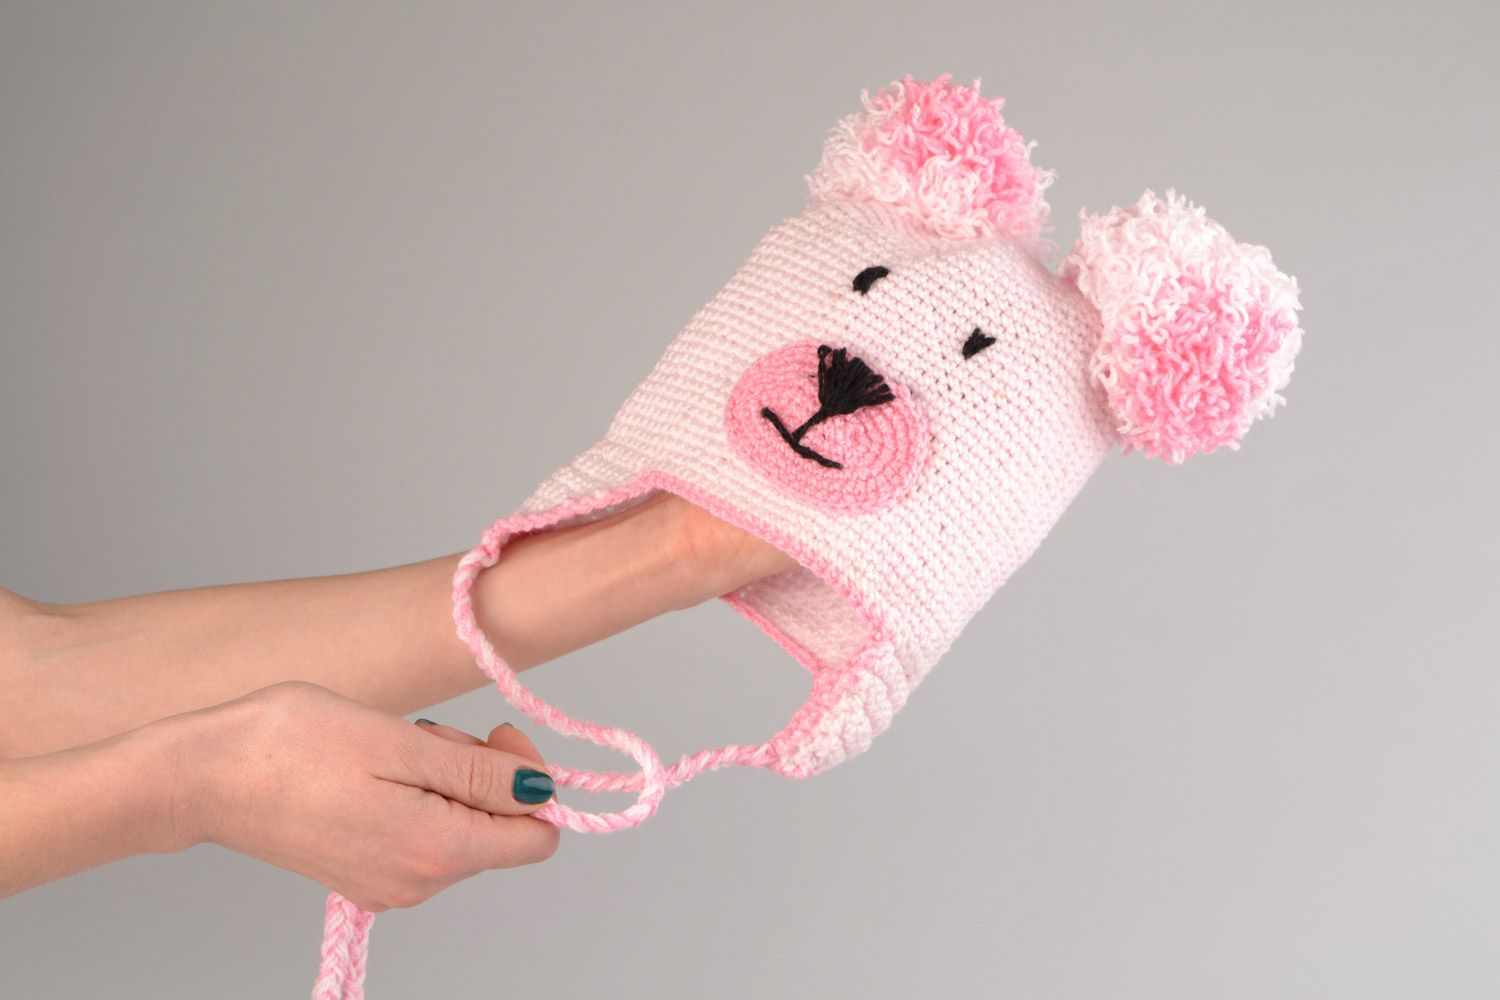 Handmade hat crocheted of hypoallergenic acrylics in the shape of pink bear photo 2